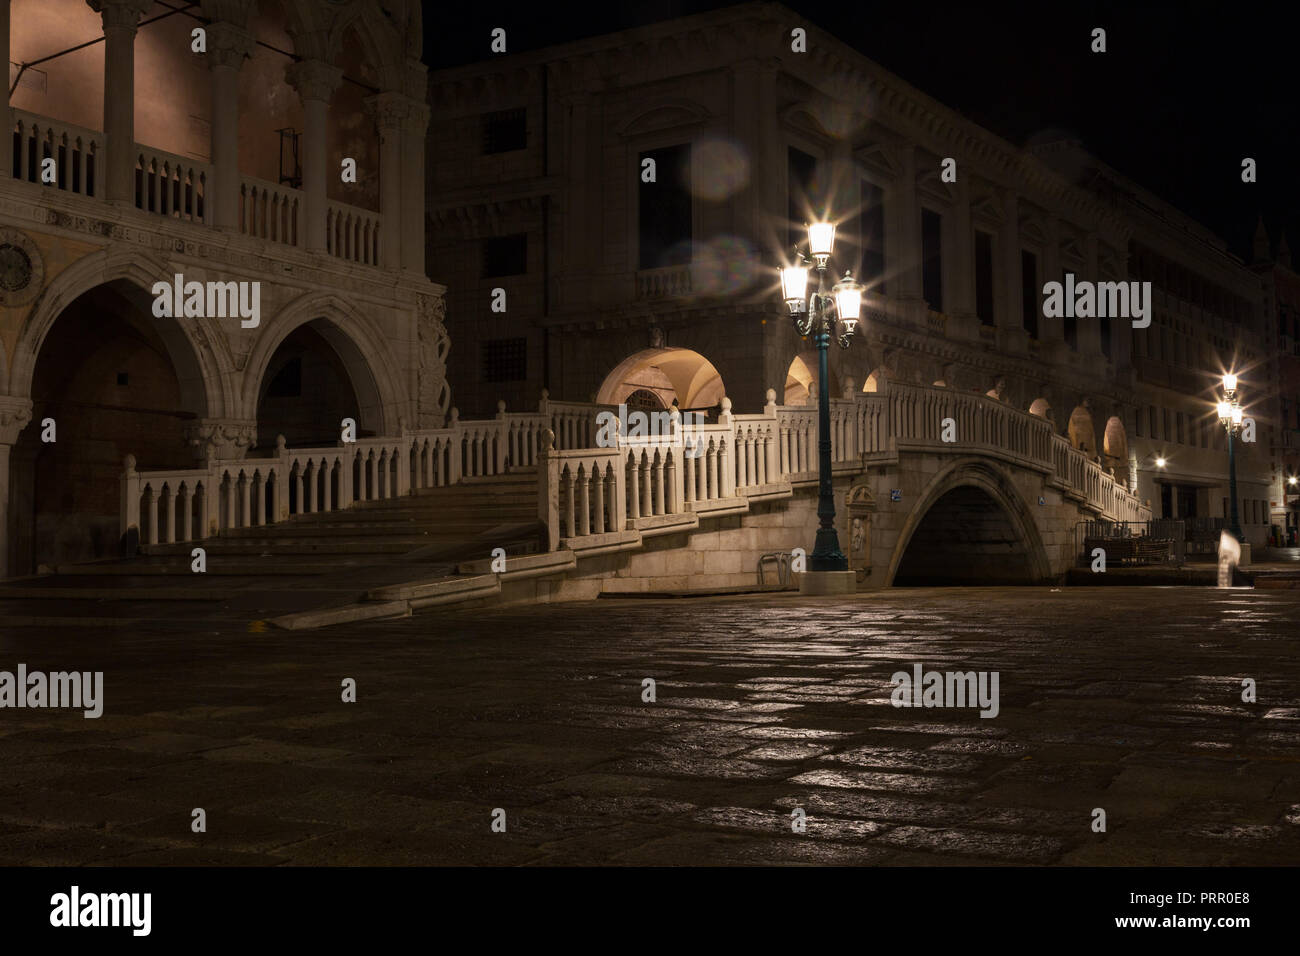 bridge via the Palace channel, a lamp and a wall of Doges Palace at night during a rain, Venice Stock Photo